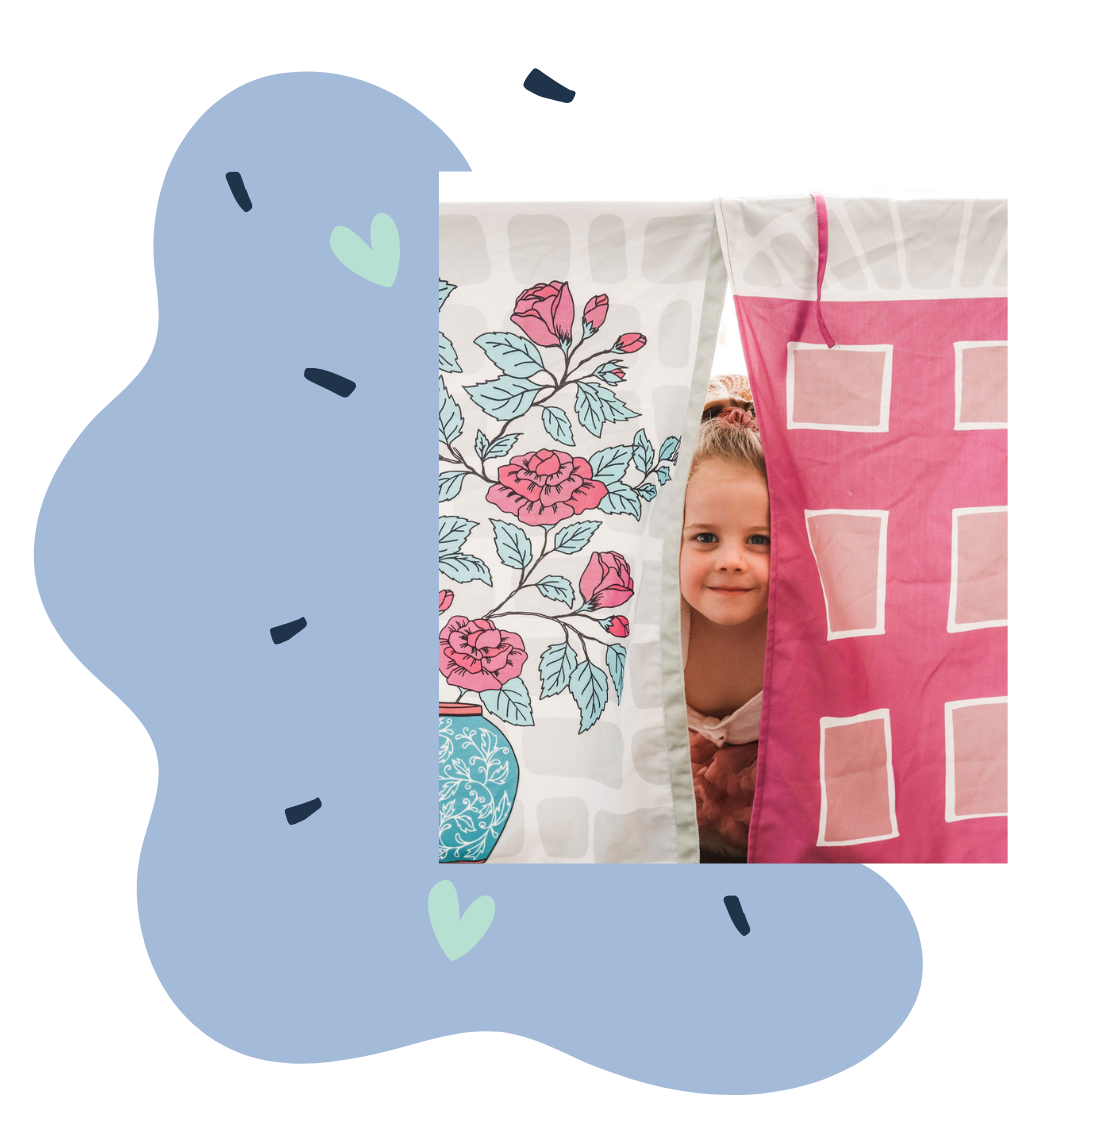 Image of small child peeking from behind the door of Petite Maison Play Home Sweet Home Table Tent cubby